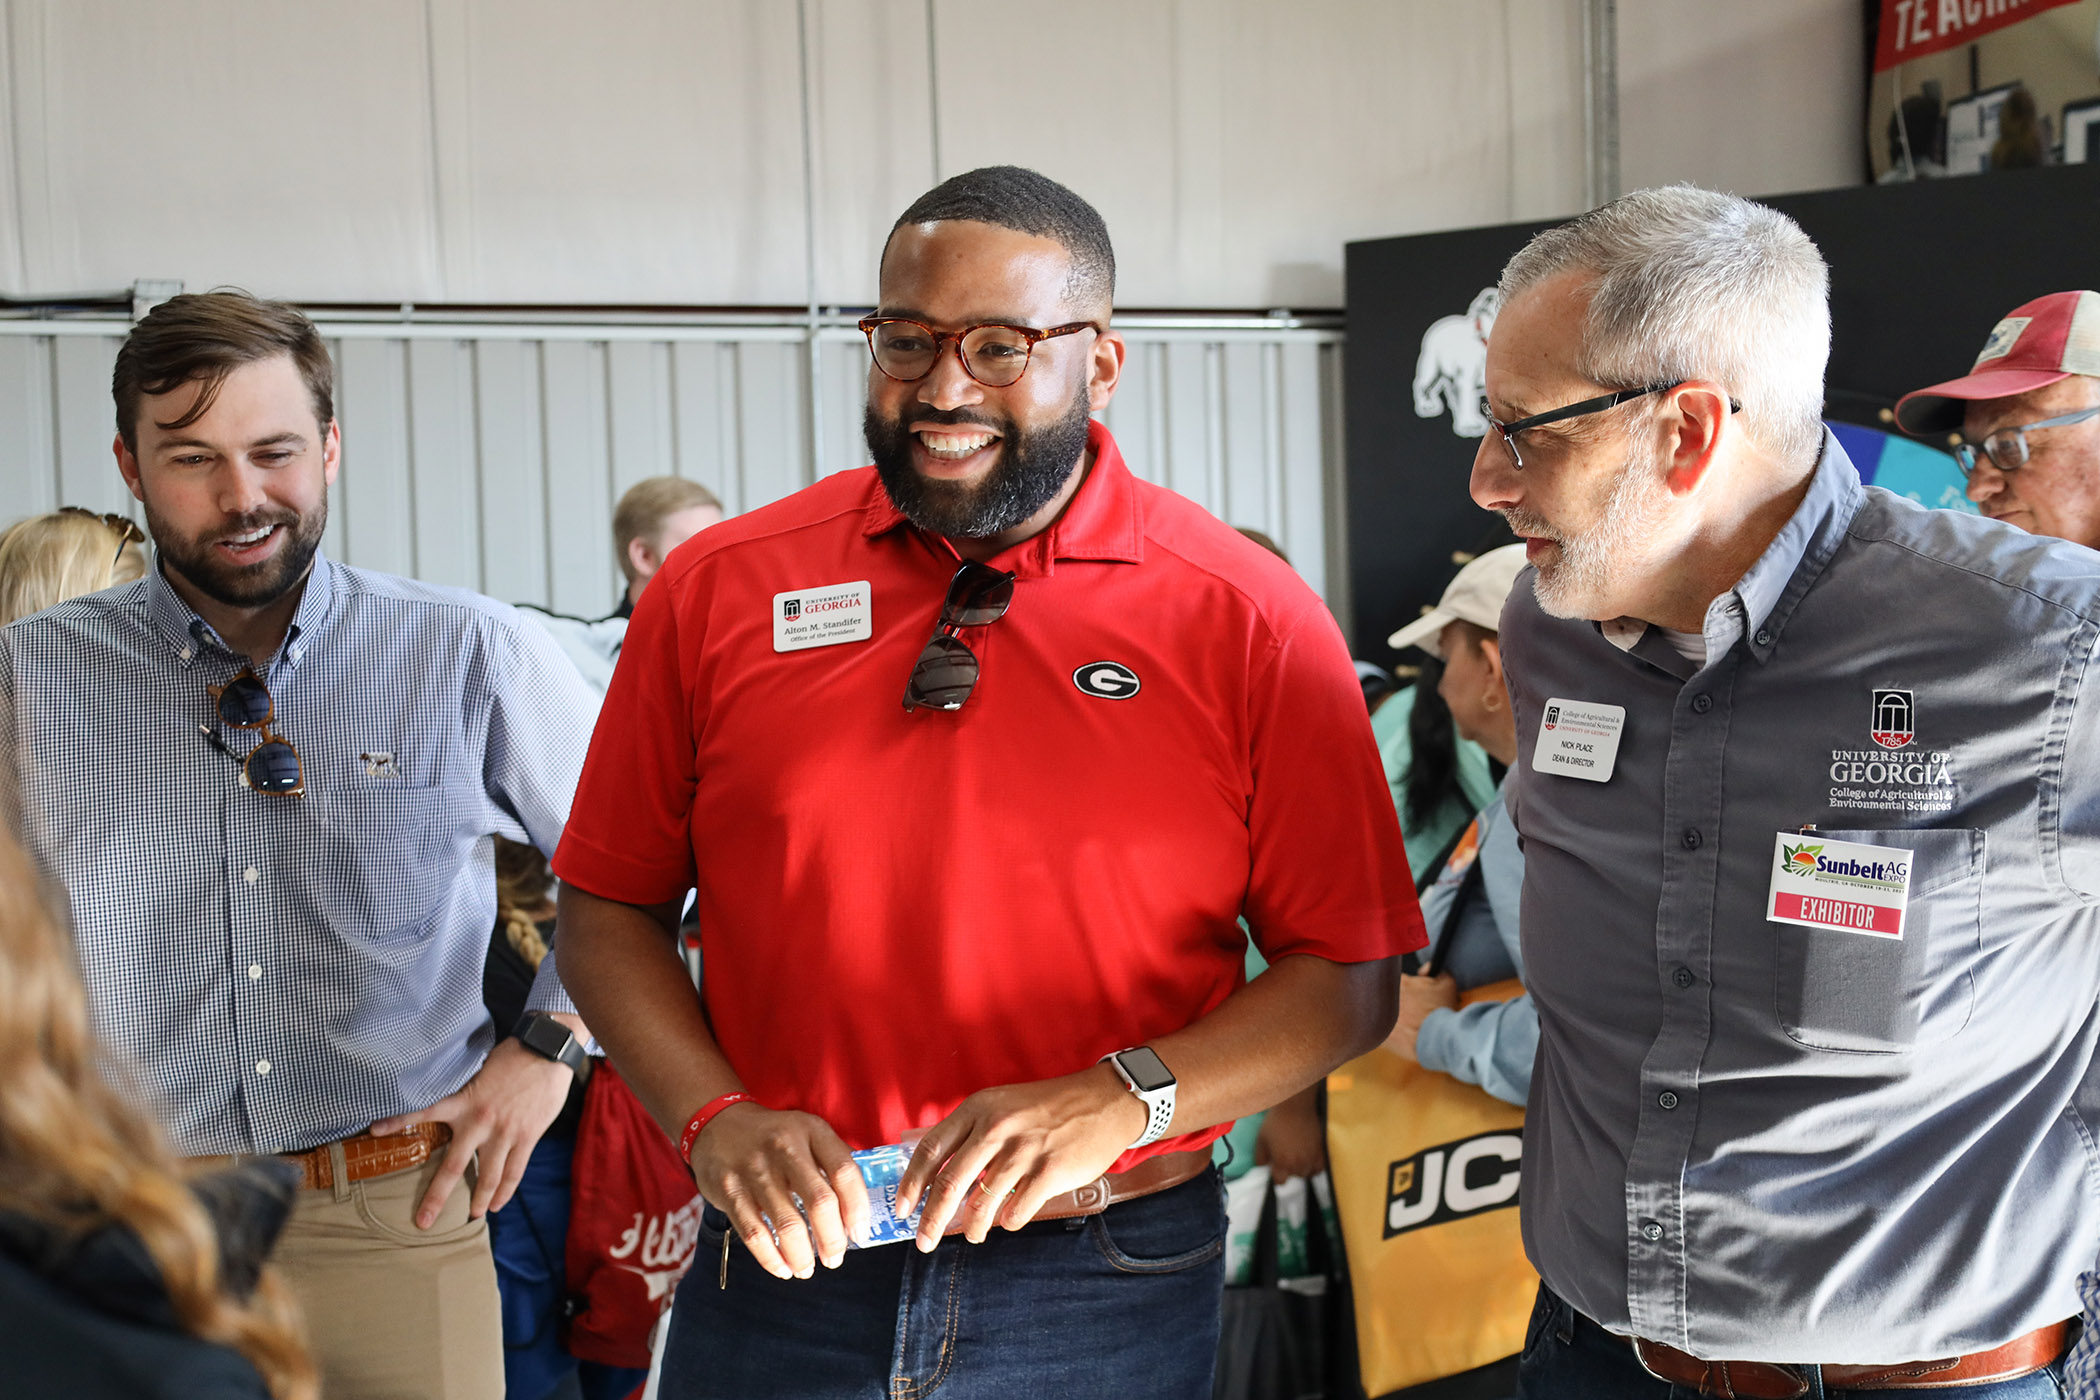 Blake Raulerson, Alton Standifer and Nick Place talk with CAES Ambassadors at the Sunbelt Ag Expo in Moultrie, Georgia.